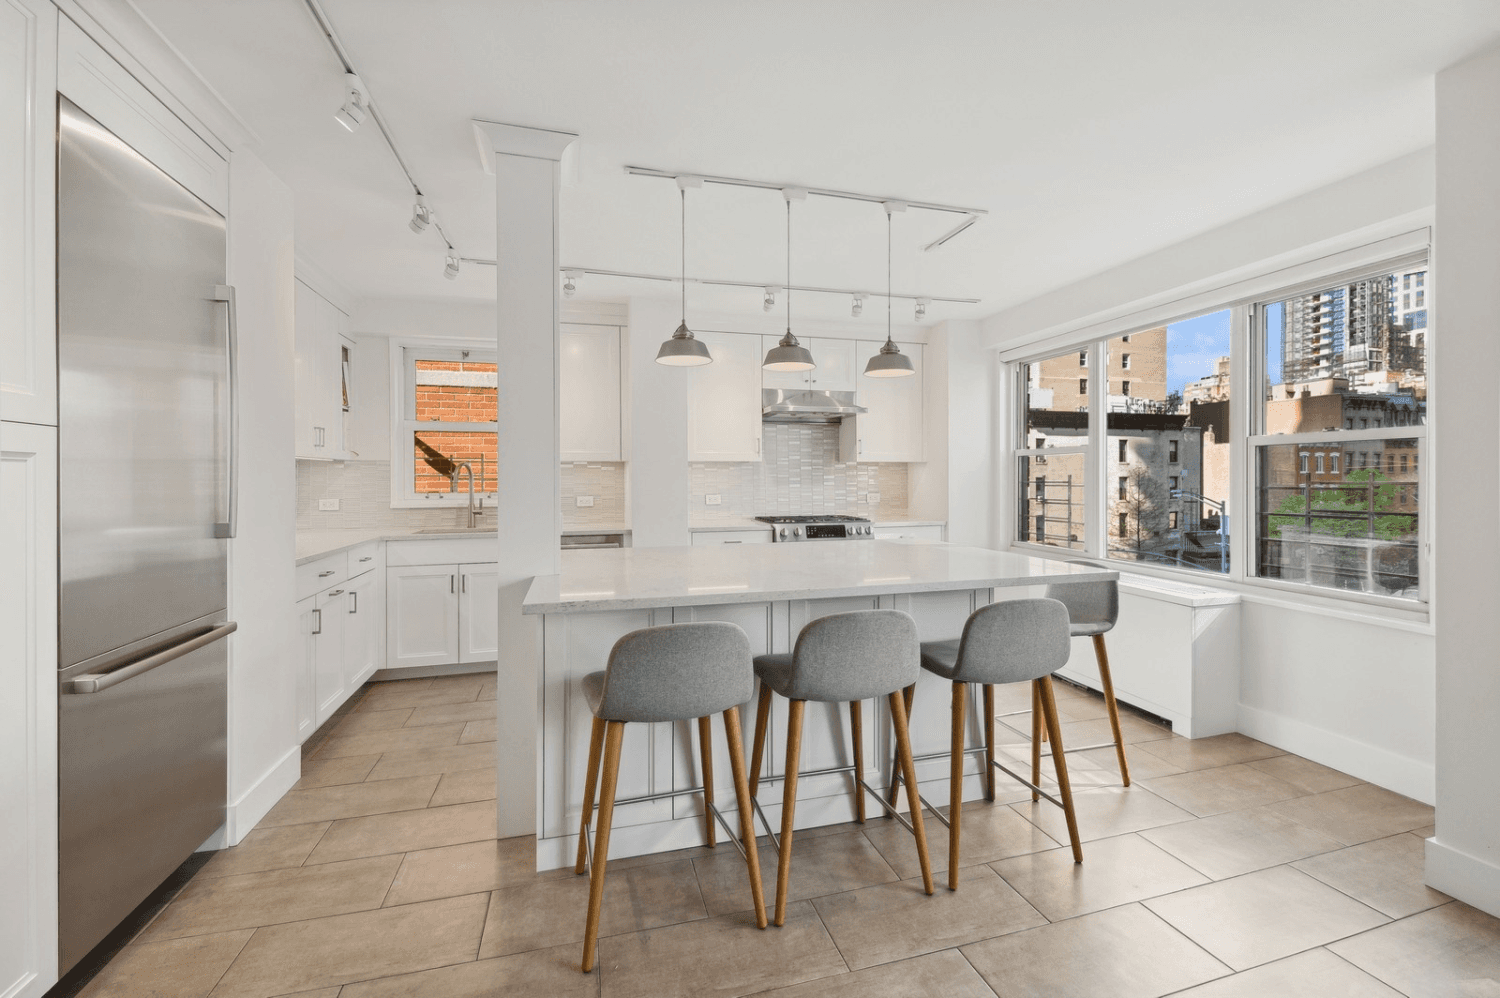 Sunny and spacious four bedroom, three bathroom coop on the Upper East Side with low maintenance, washer dryer, eight closets, and stunning renovation now available for sale.